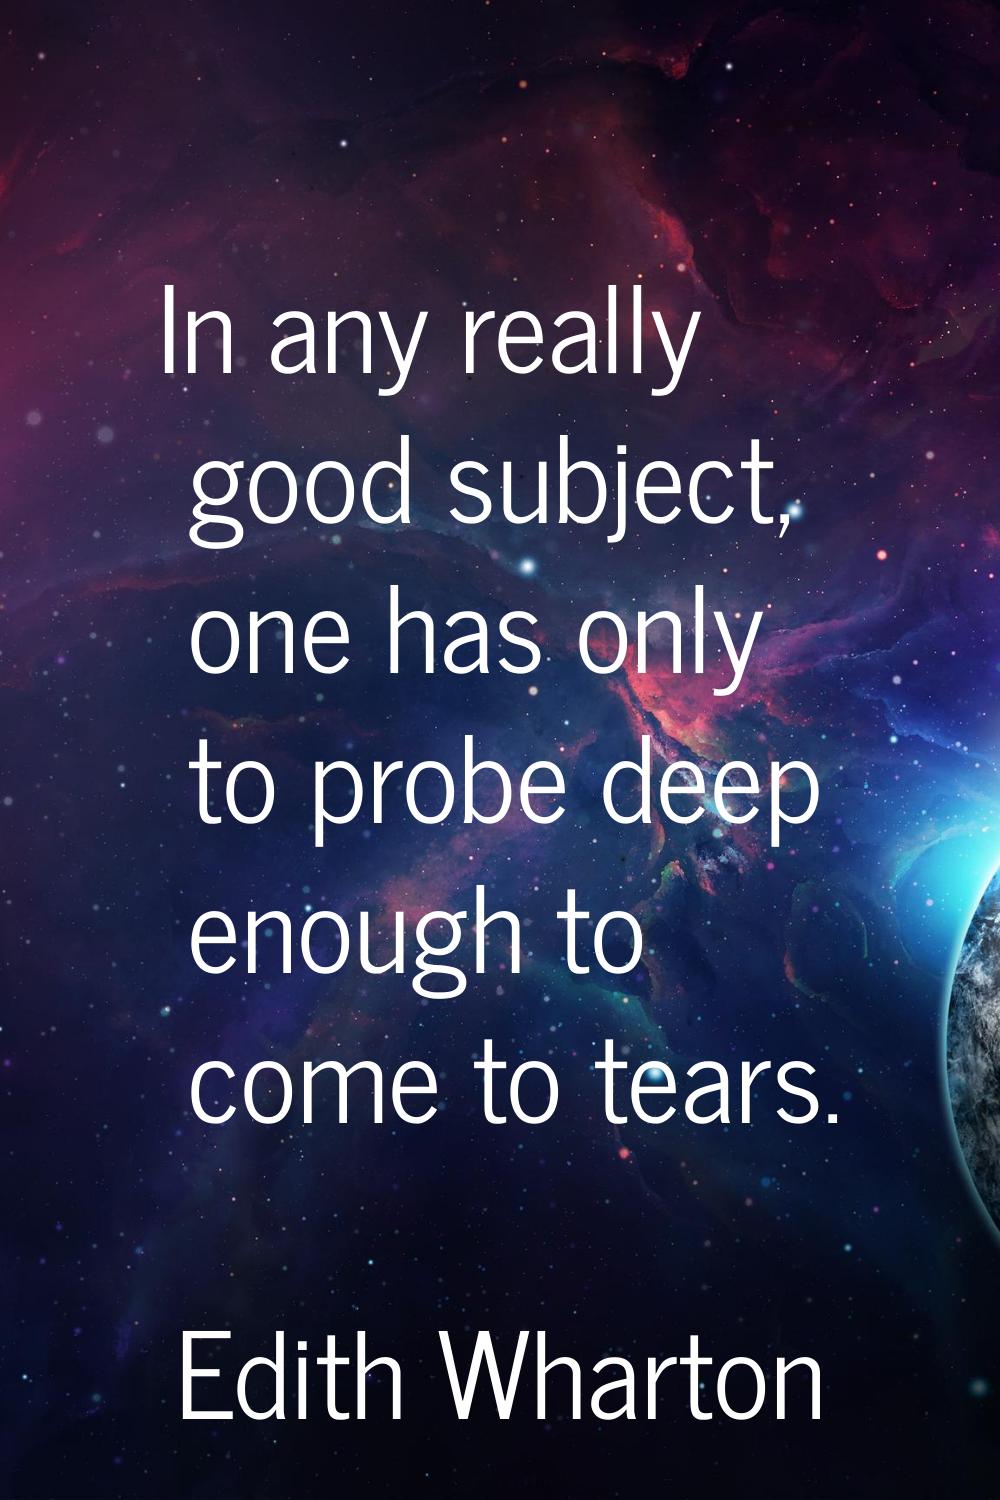 In any really good subject, one has only to probe deep enough to come to tears.